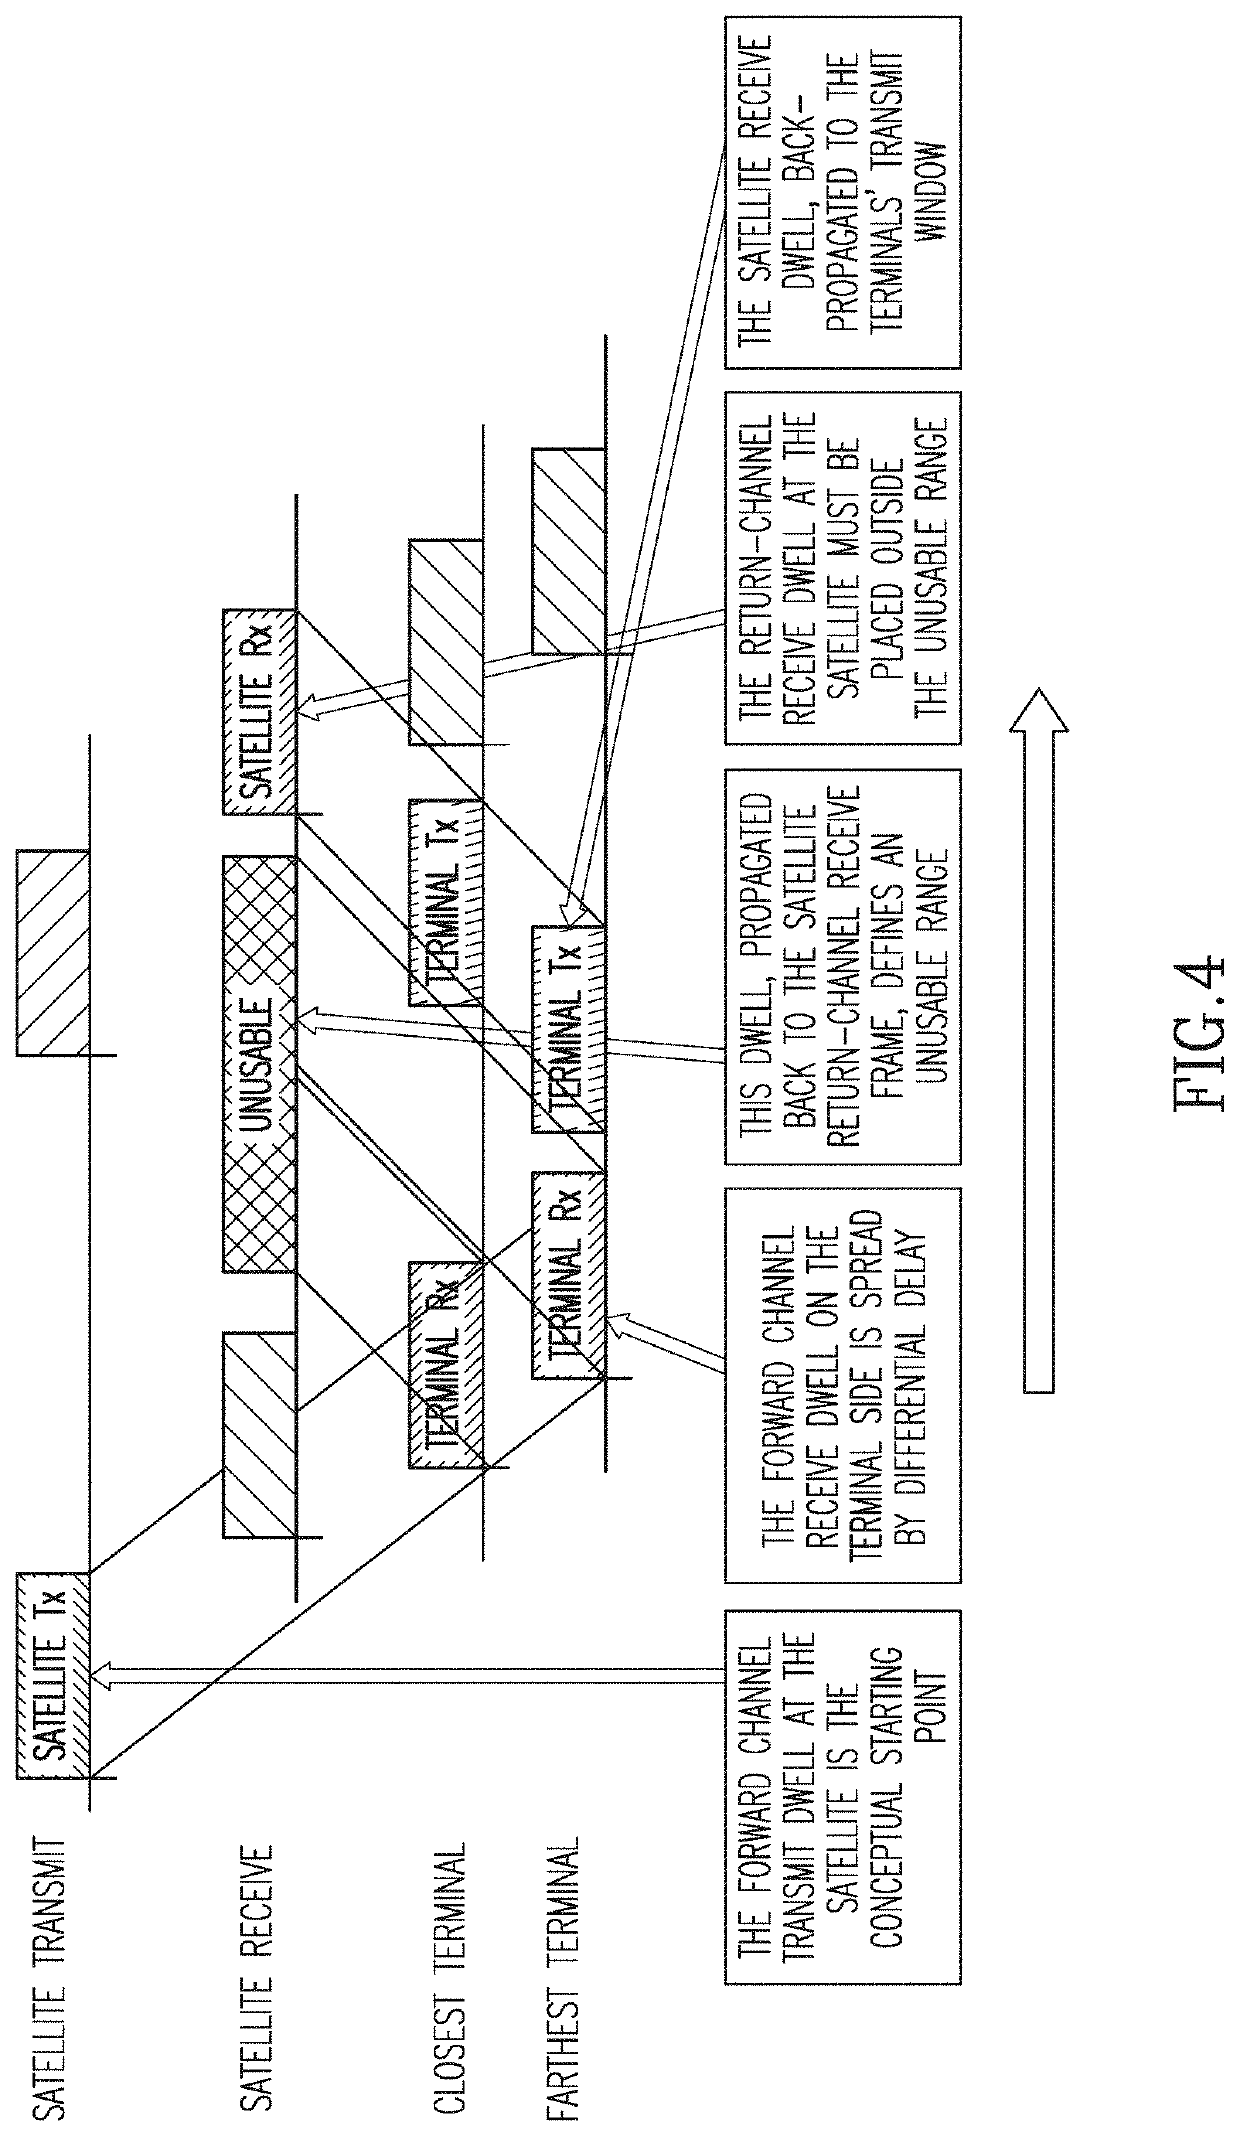 A Method for Implementing Beam Hopping in a Satellite Communications Network